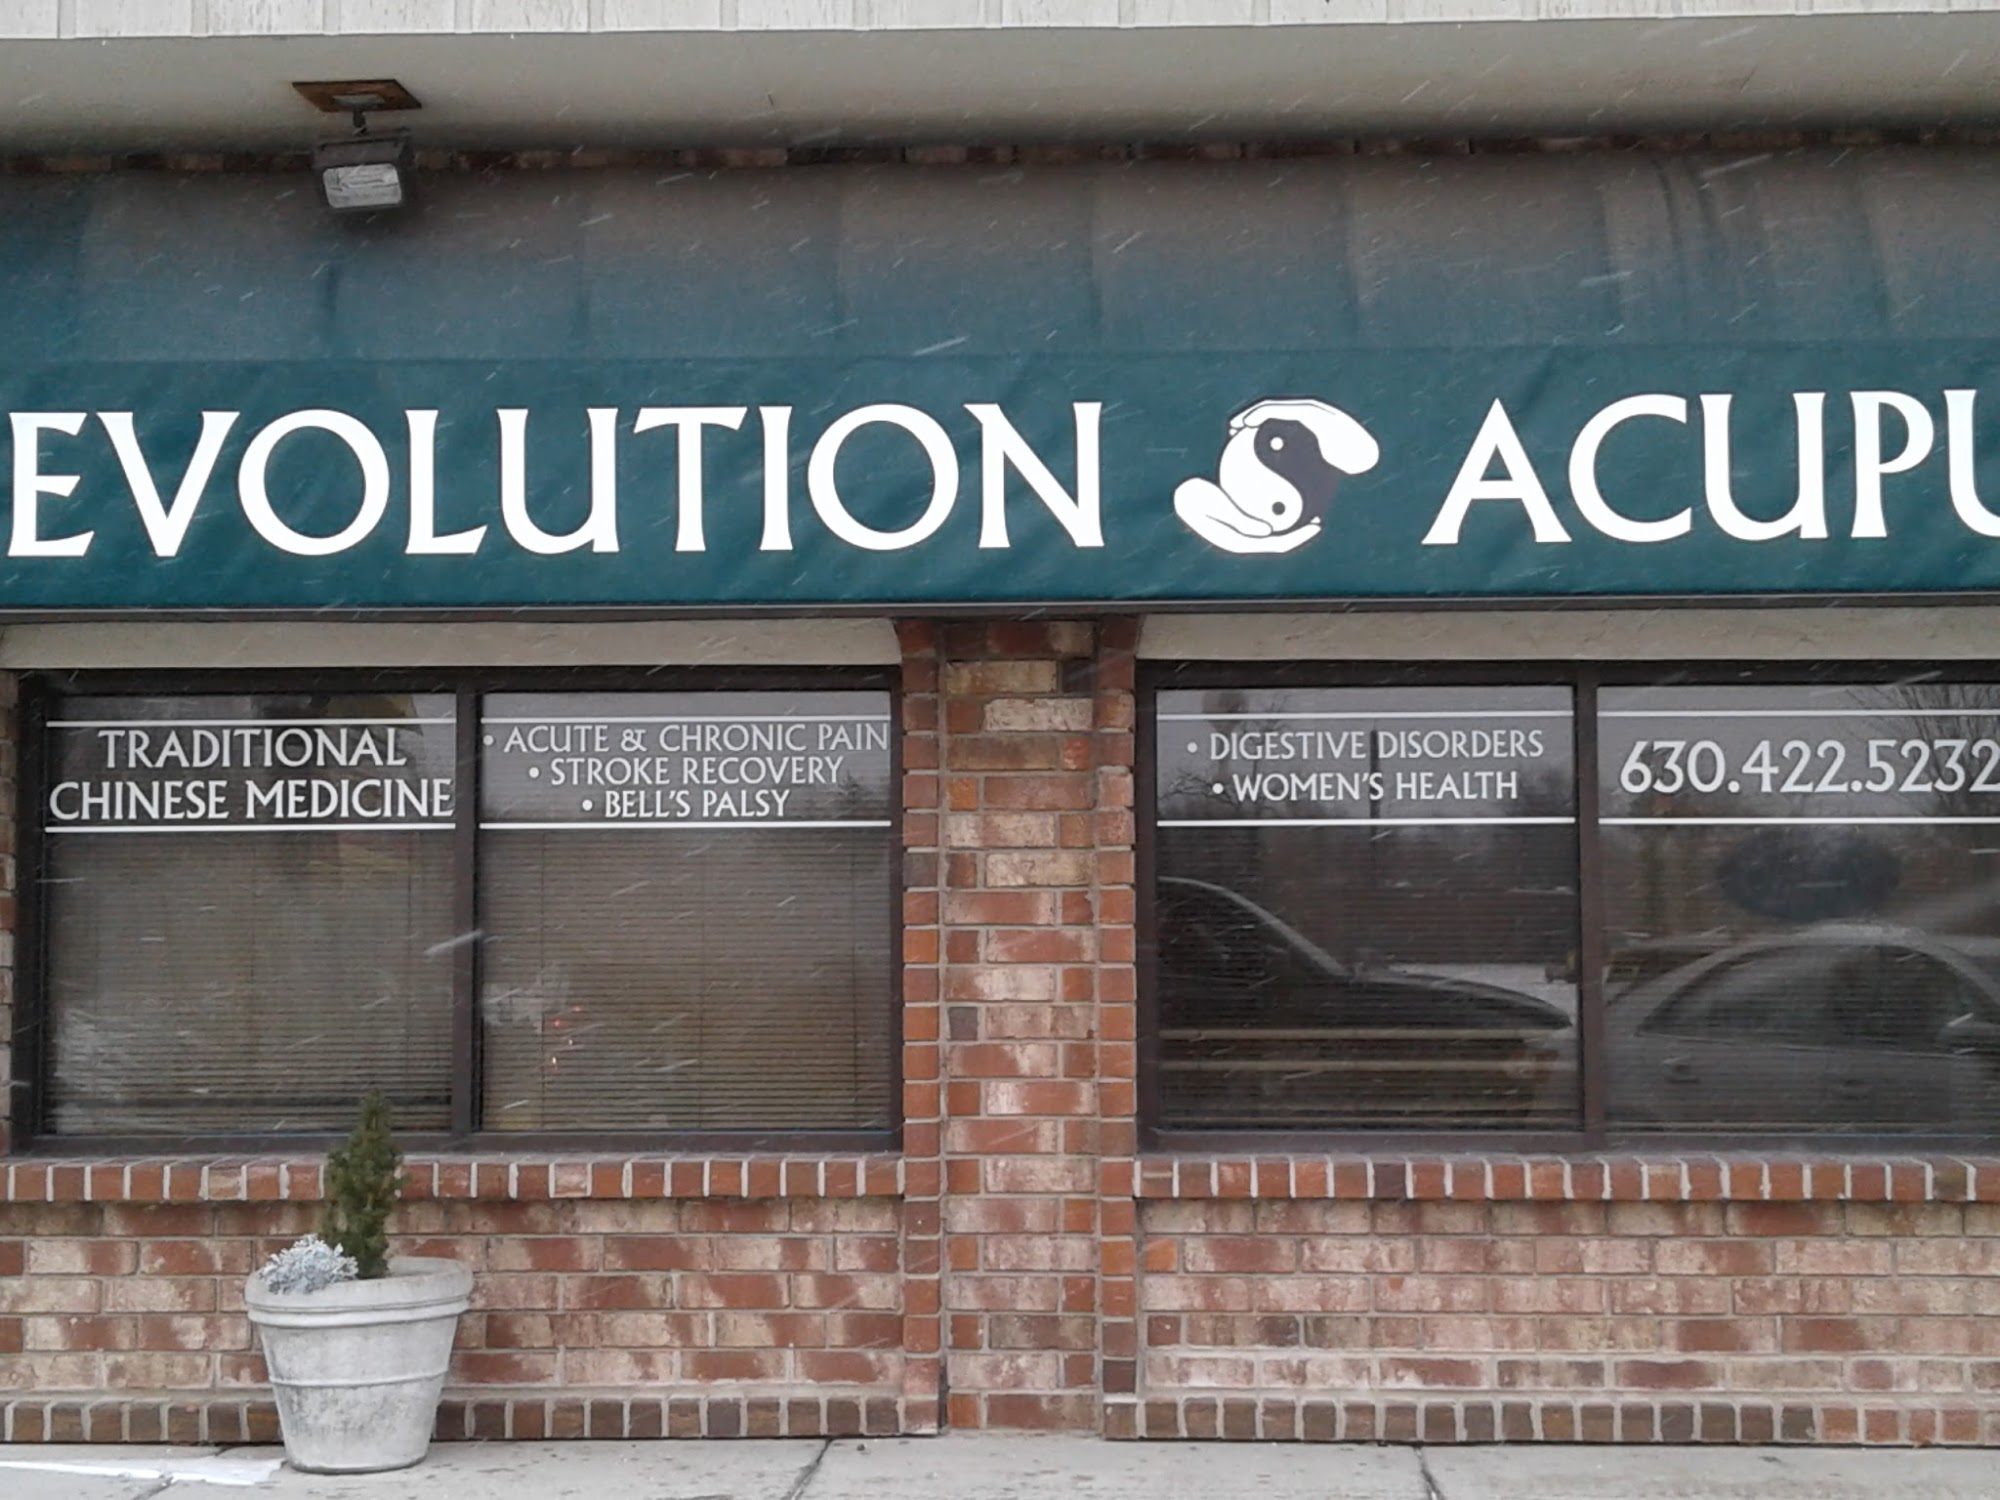 Revolution Acupuncture & Herbal Clinic